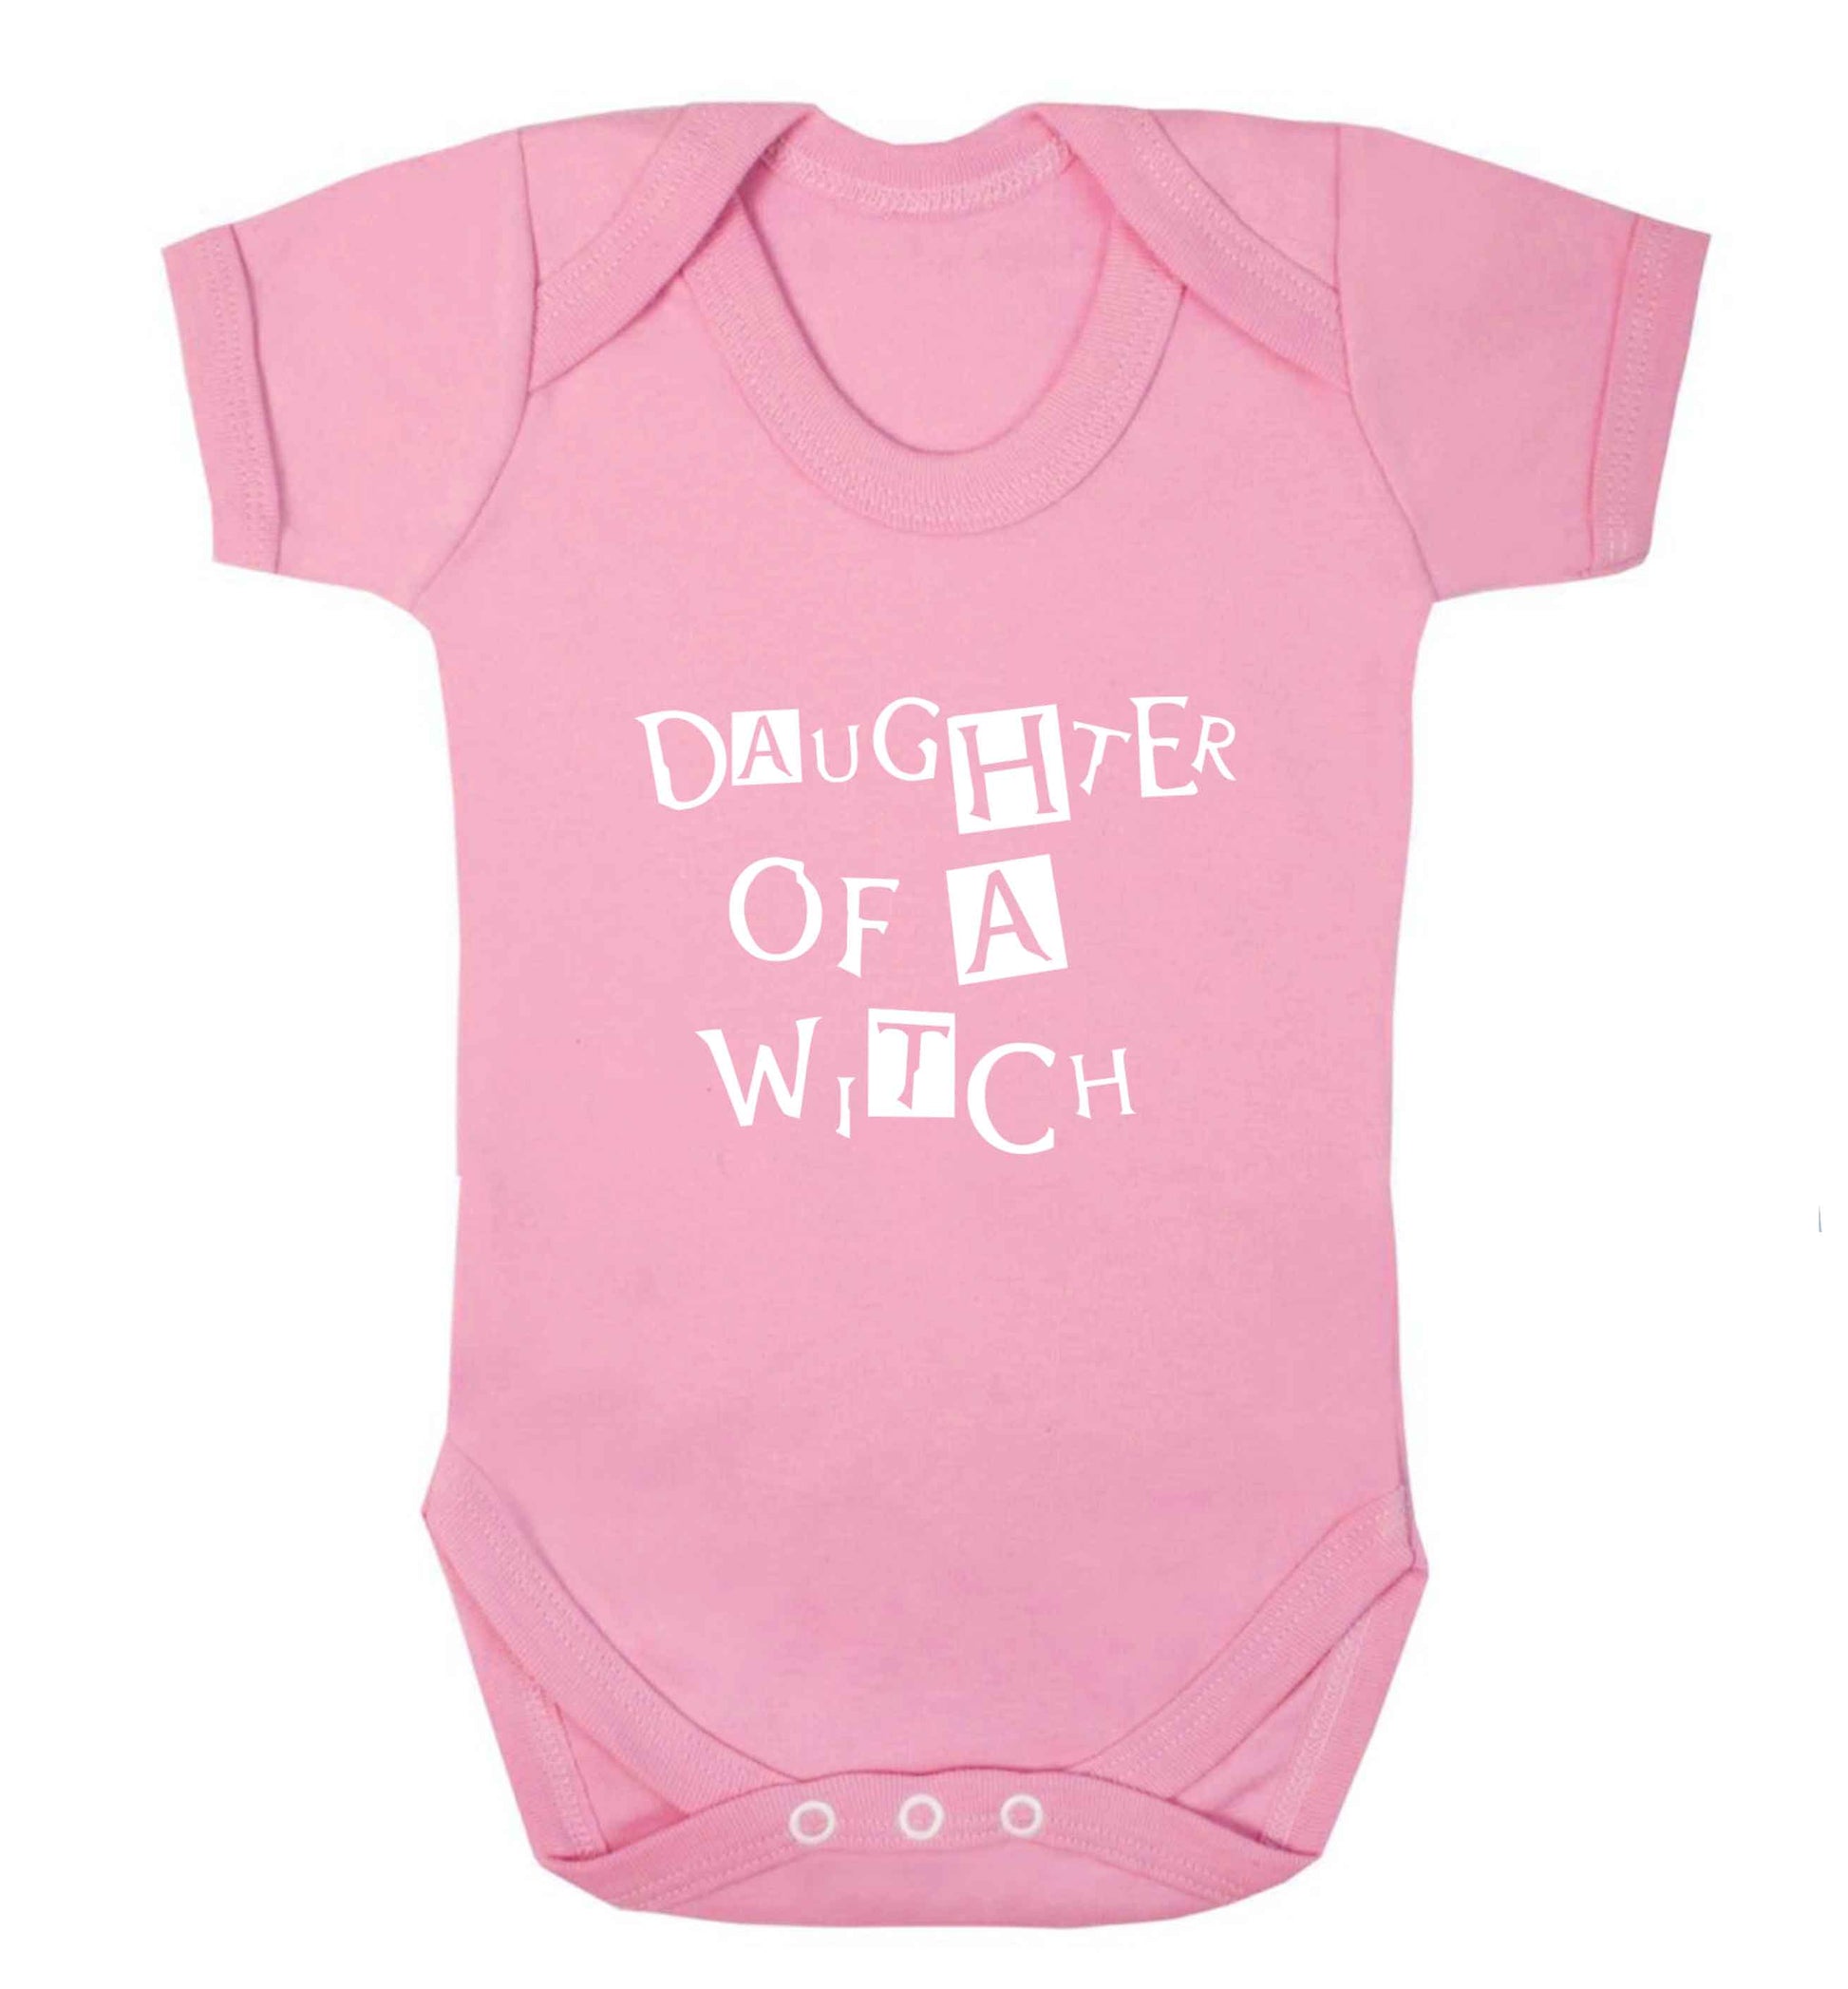 Daughter of a witch baby vest pale pink 18-24 months